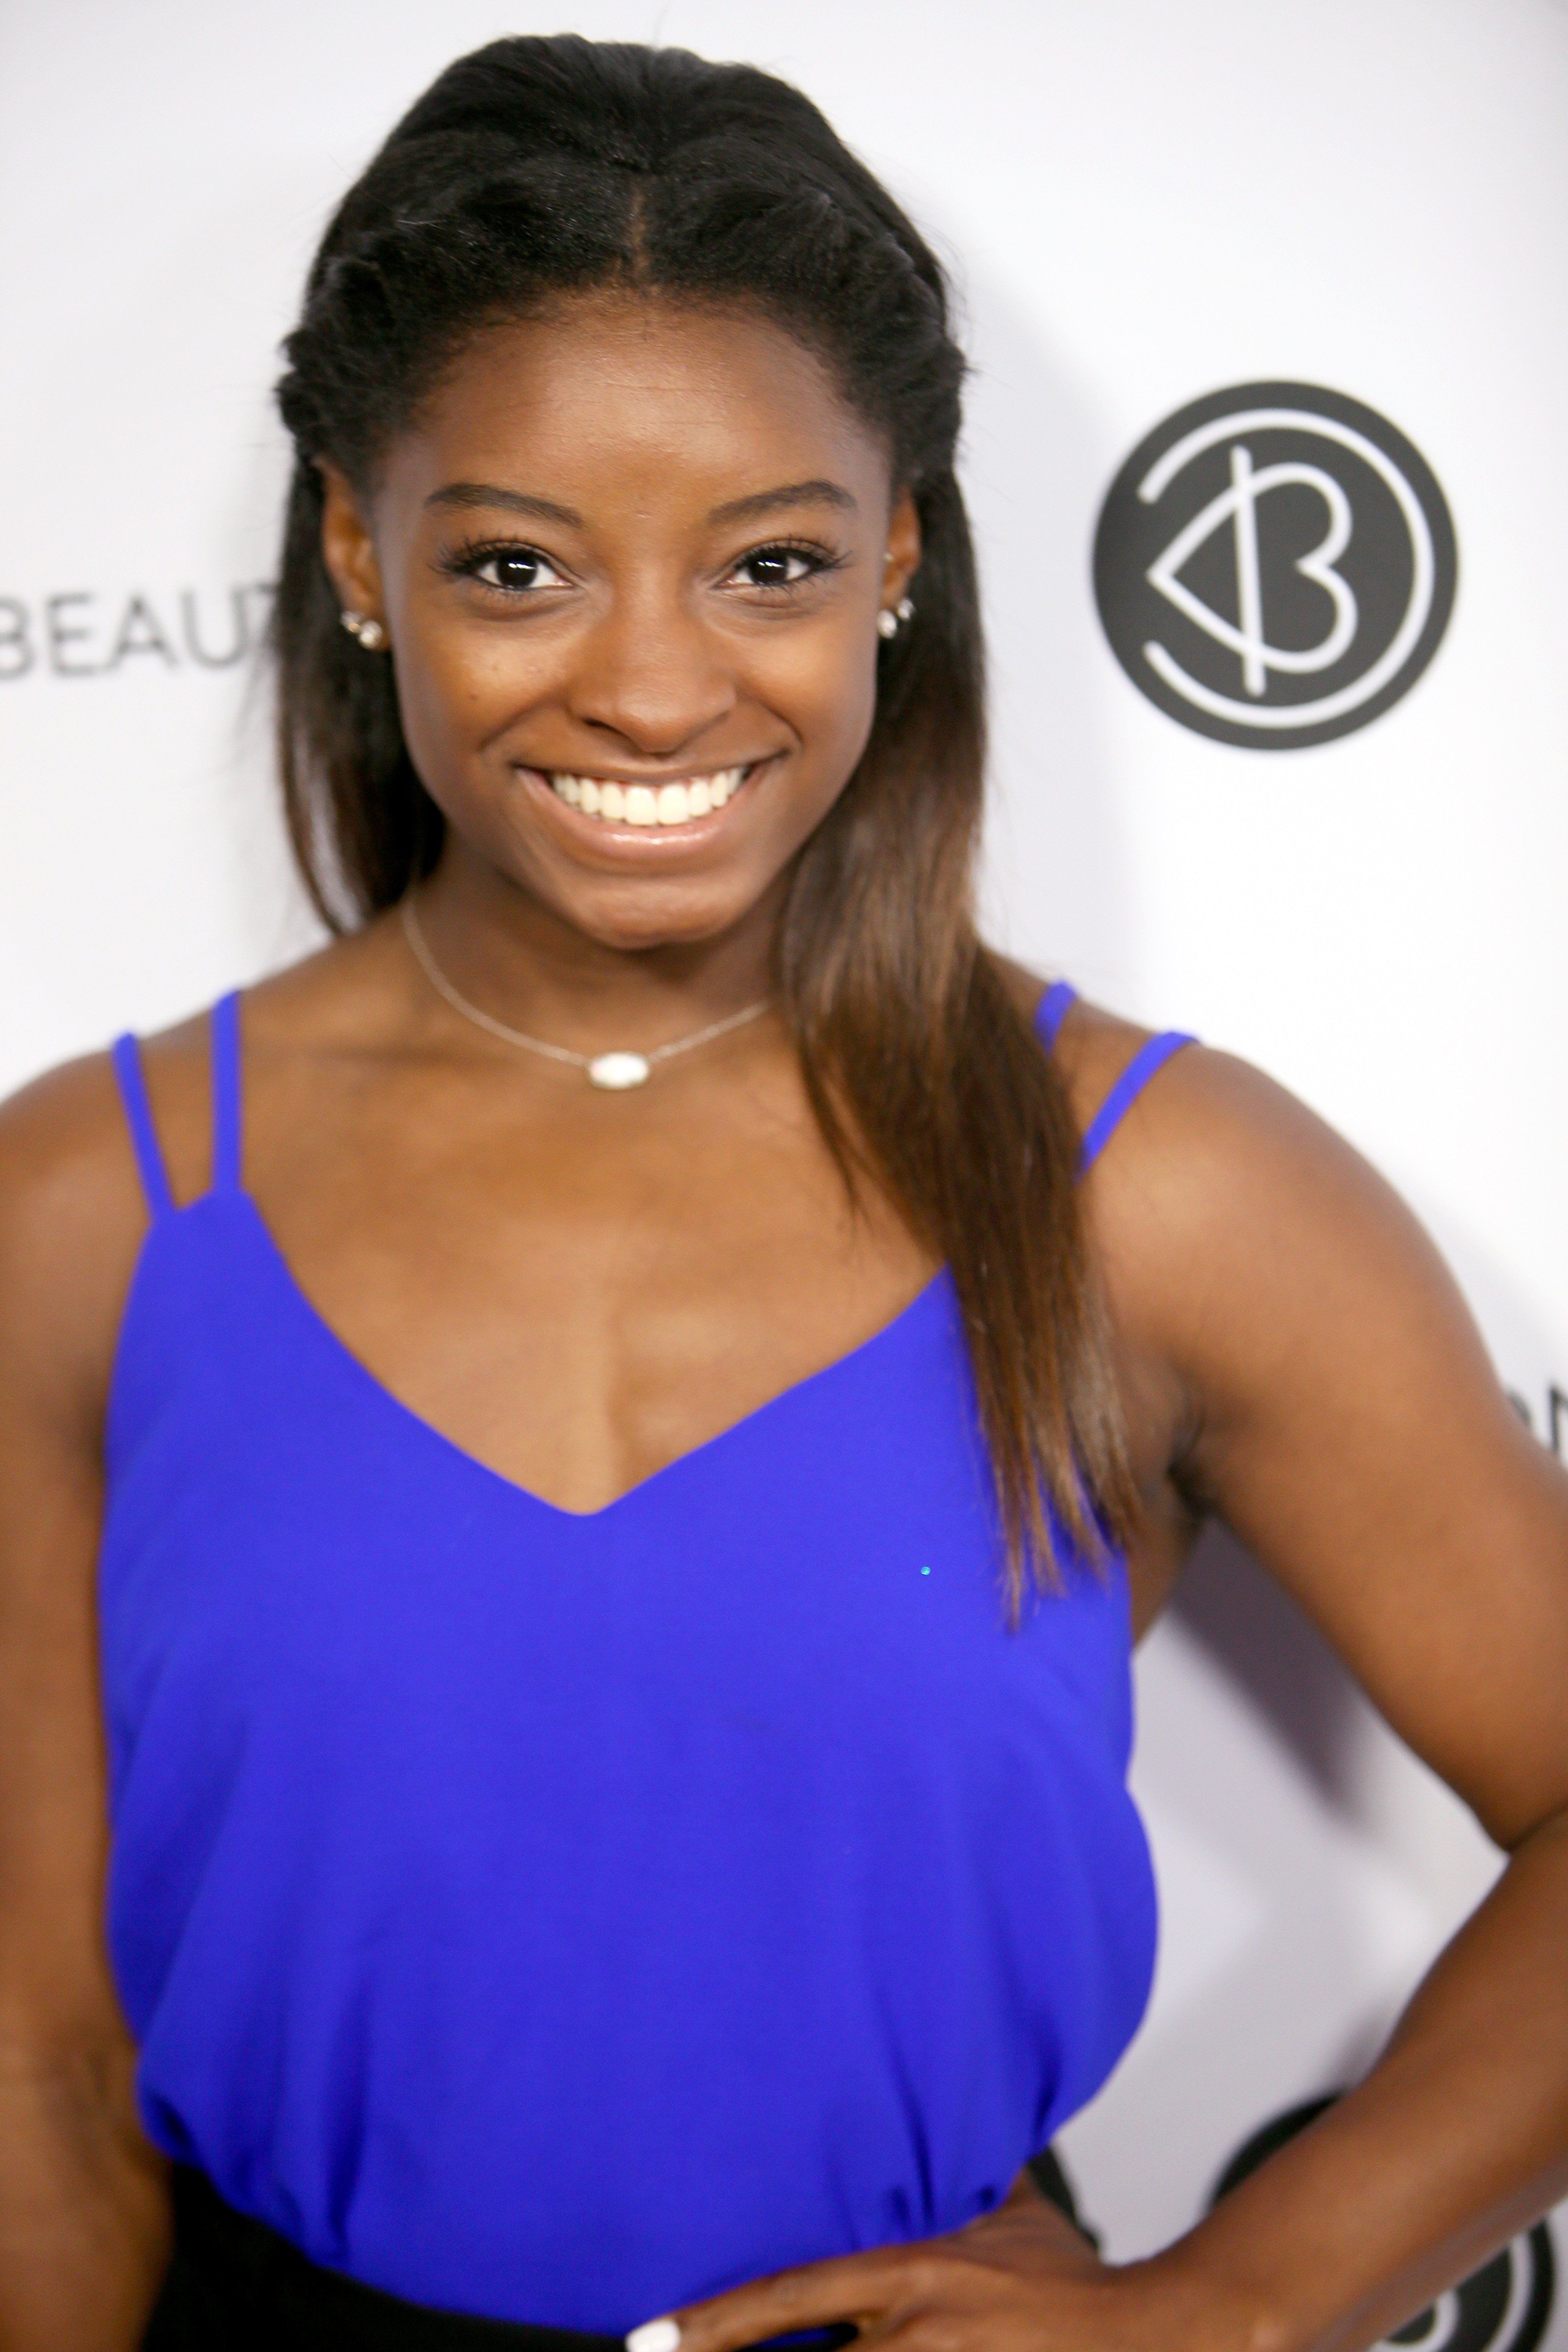 Simone Biles at the 5th Annual Beautycon Festival Los Angeles at the at Los Angeles Convention Center in Los Angeles, California | Photo: David Livingston/Getty Images